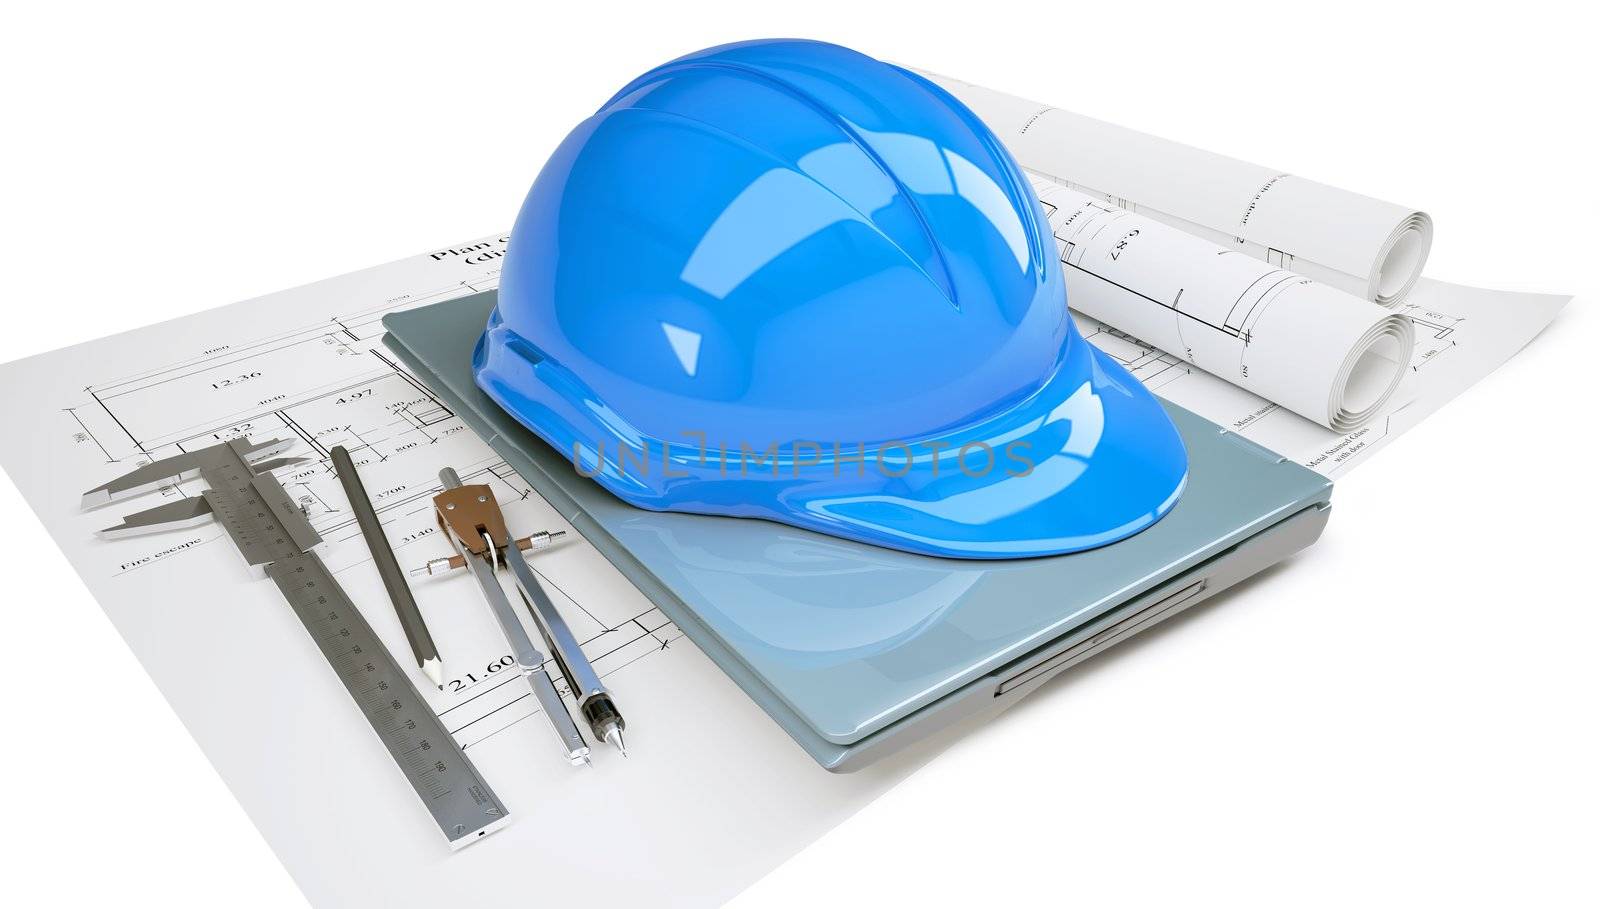 Construction helmet and laptop in the drawings by cherezoff